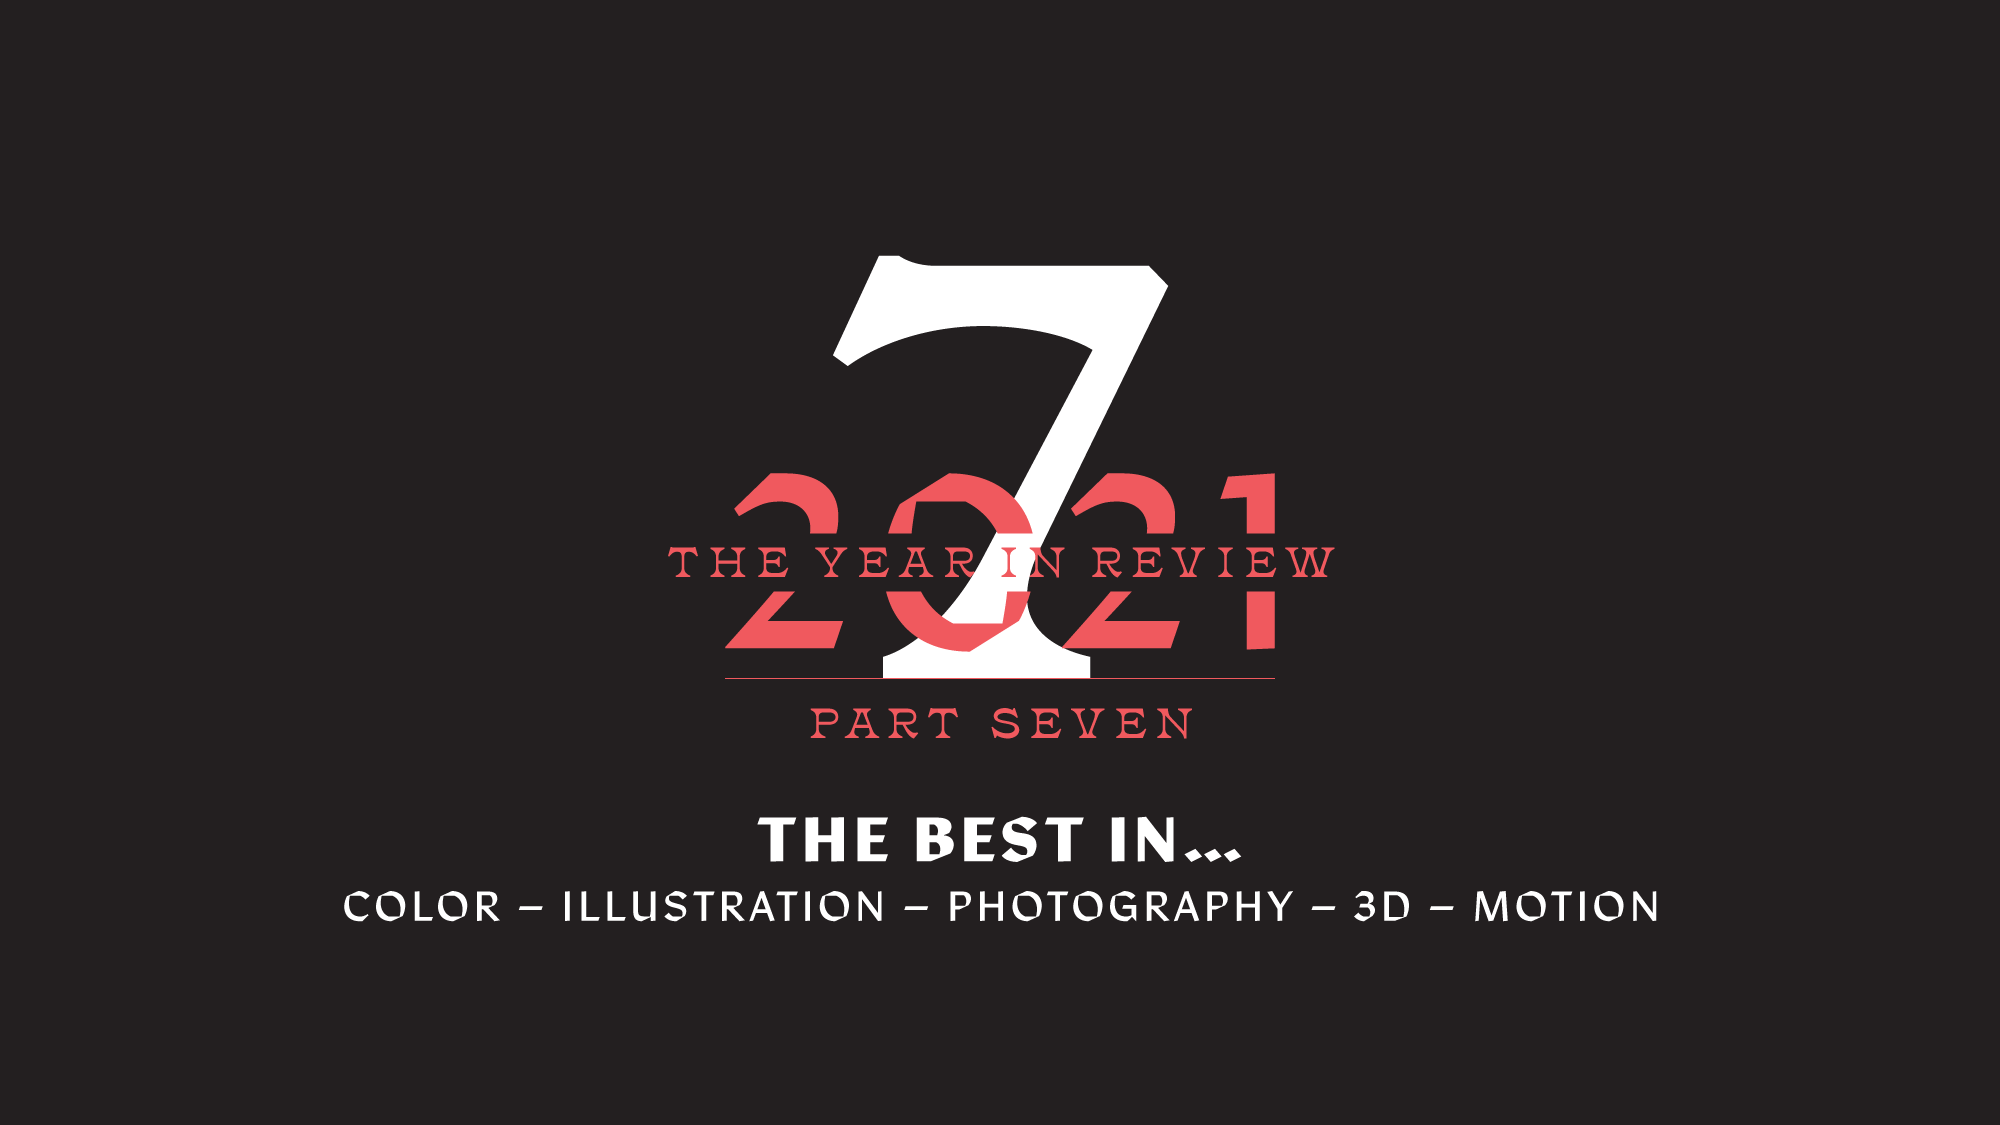 The Year in Review, Part 7: The Best in Color, Illustration, Photography, 3D Elements, and Motion